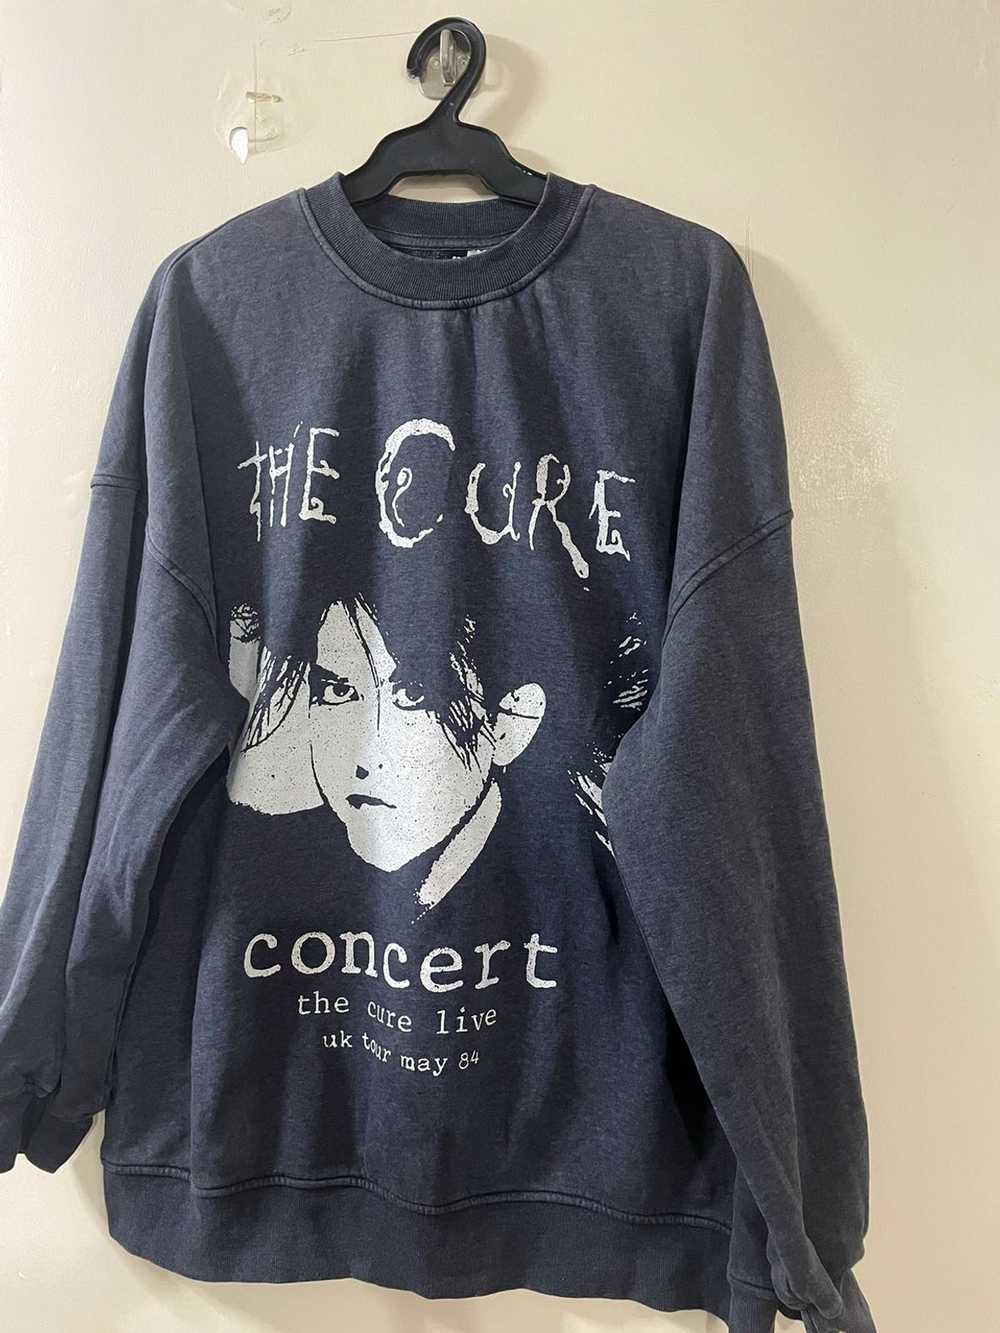 Band Tees Oversized Crewneck The Cure - image 5